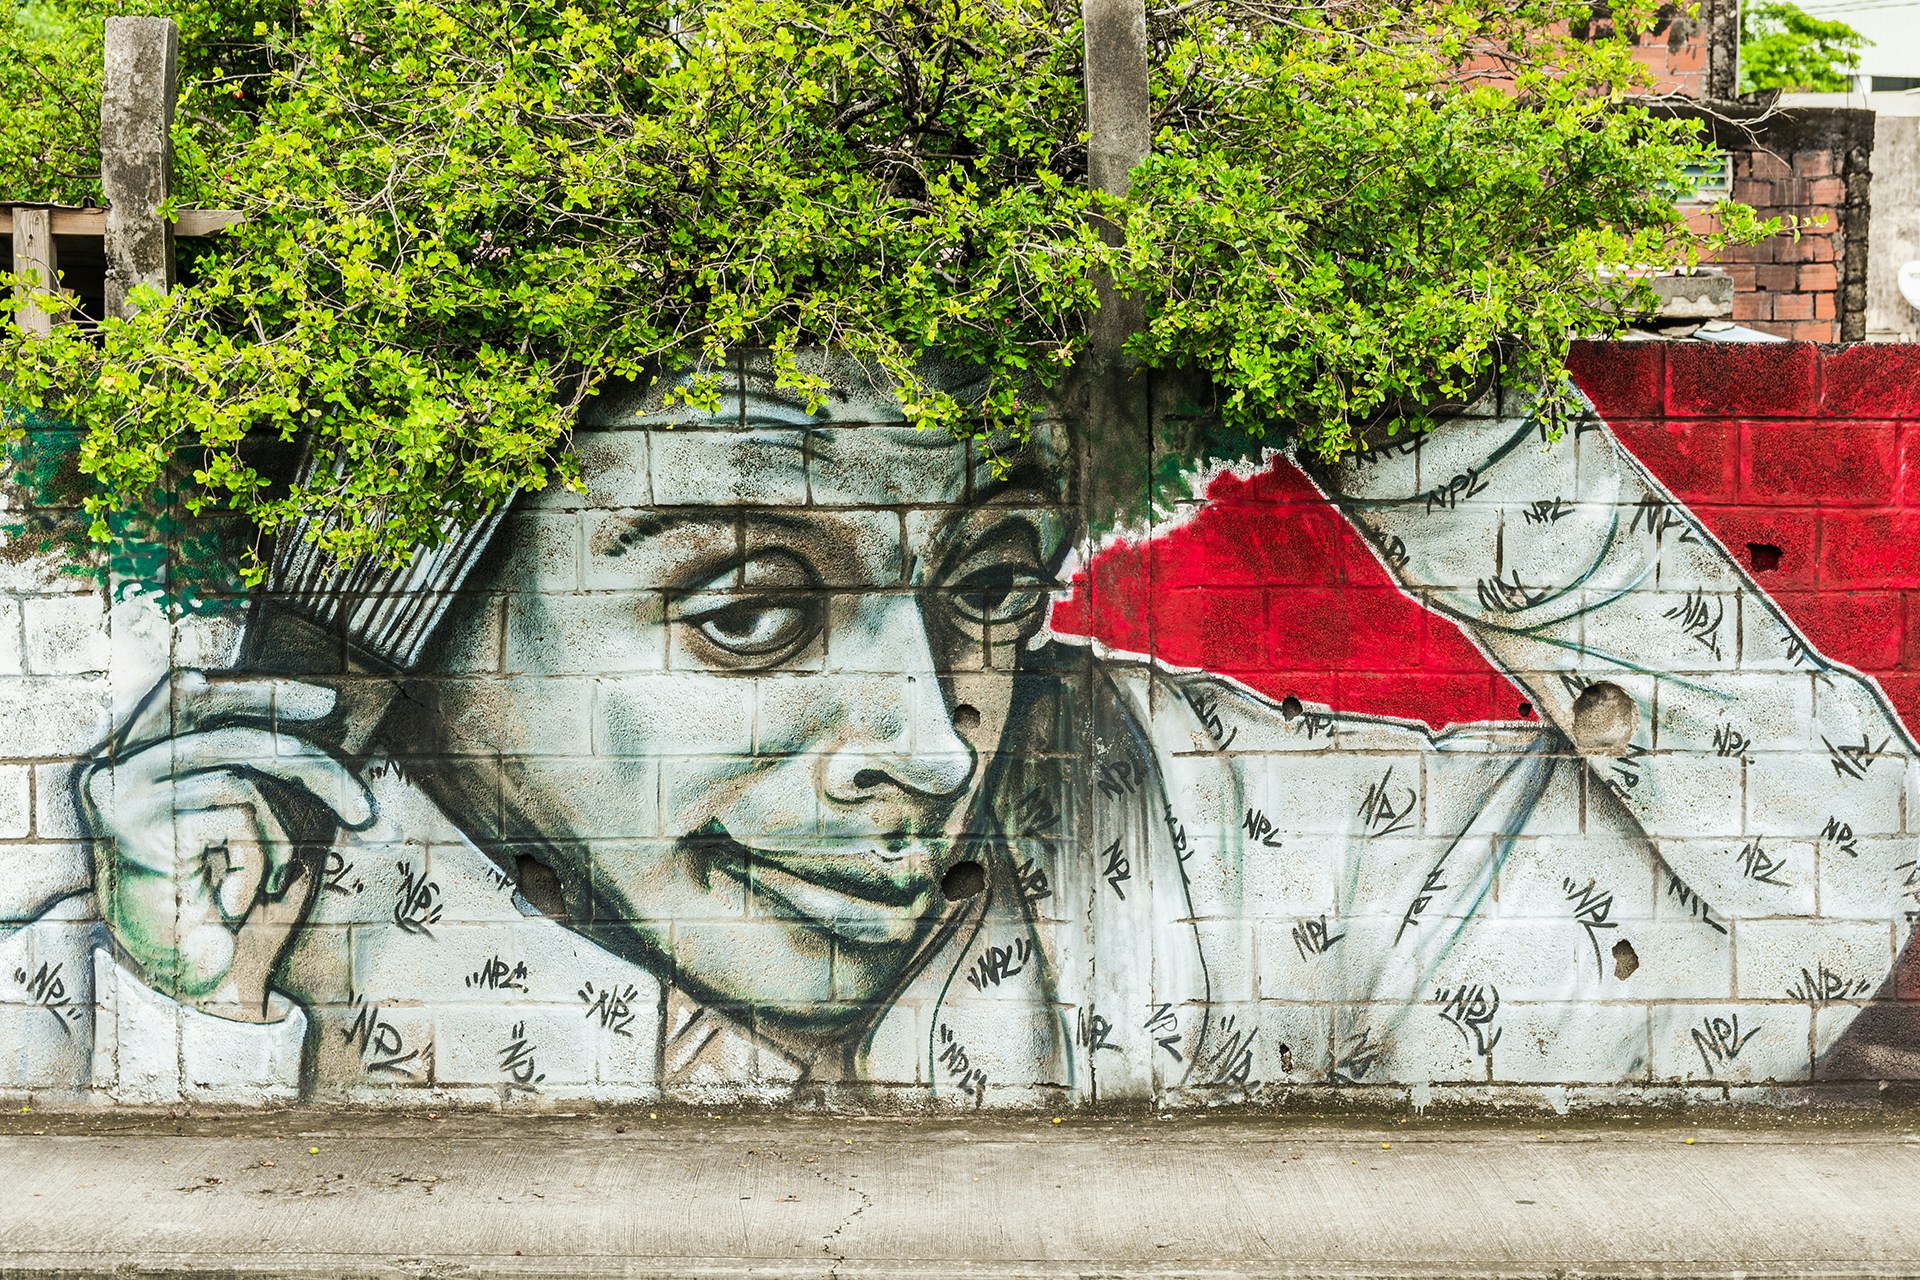 A graffiti-covered wall with the image of a man creates the illusion that a tree's foliage is the person's hair. This is an example of the tactics often used in guerrilla marketing